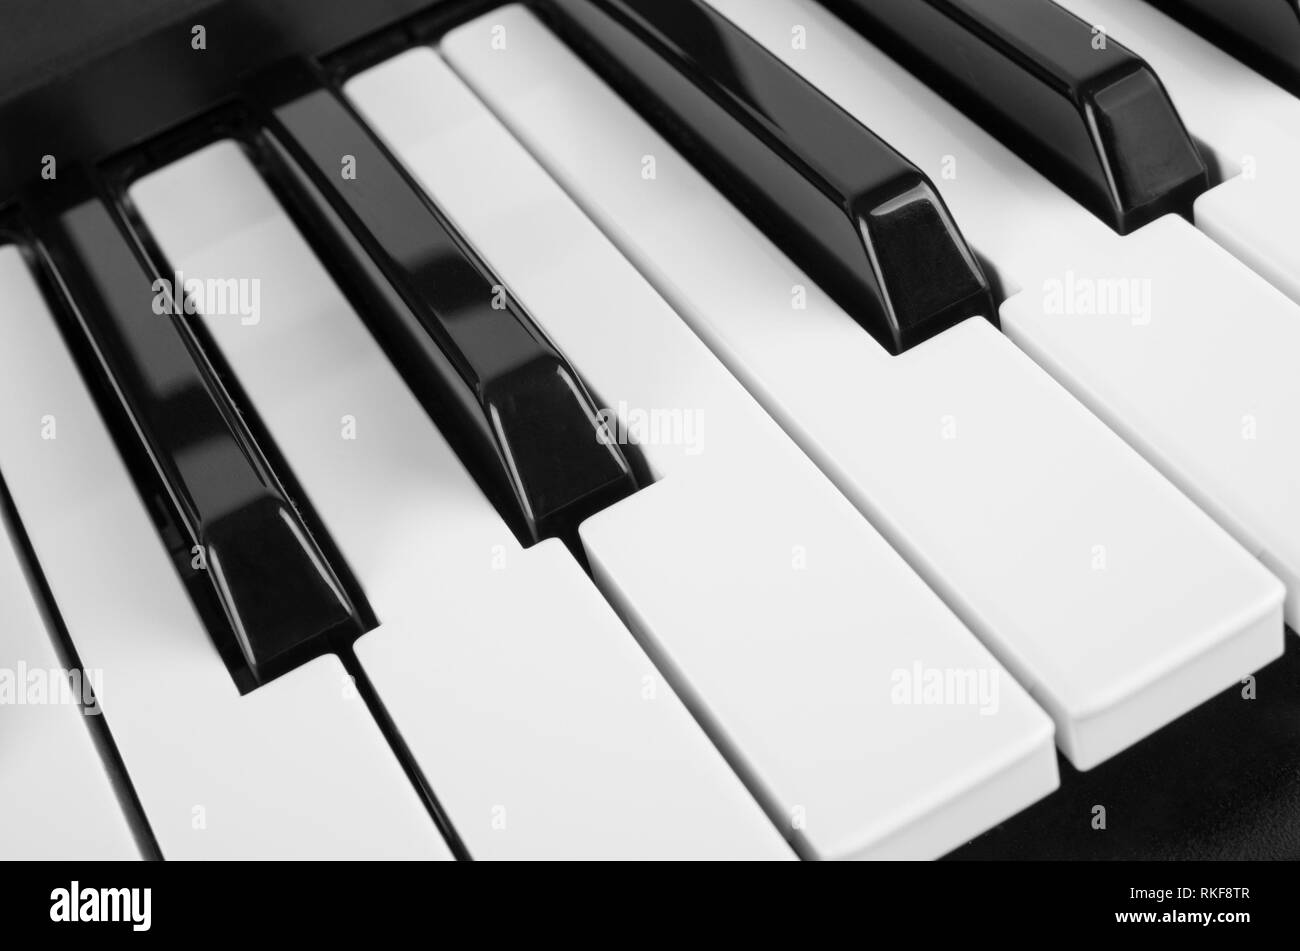 Piano Key Black And White Stock Photos Images Alamy